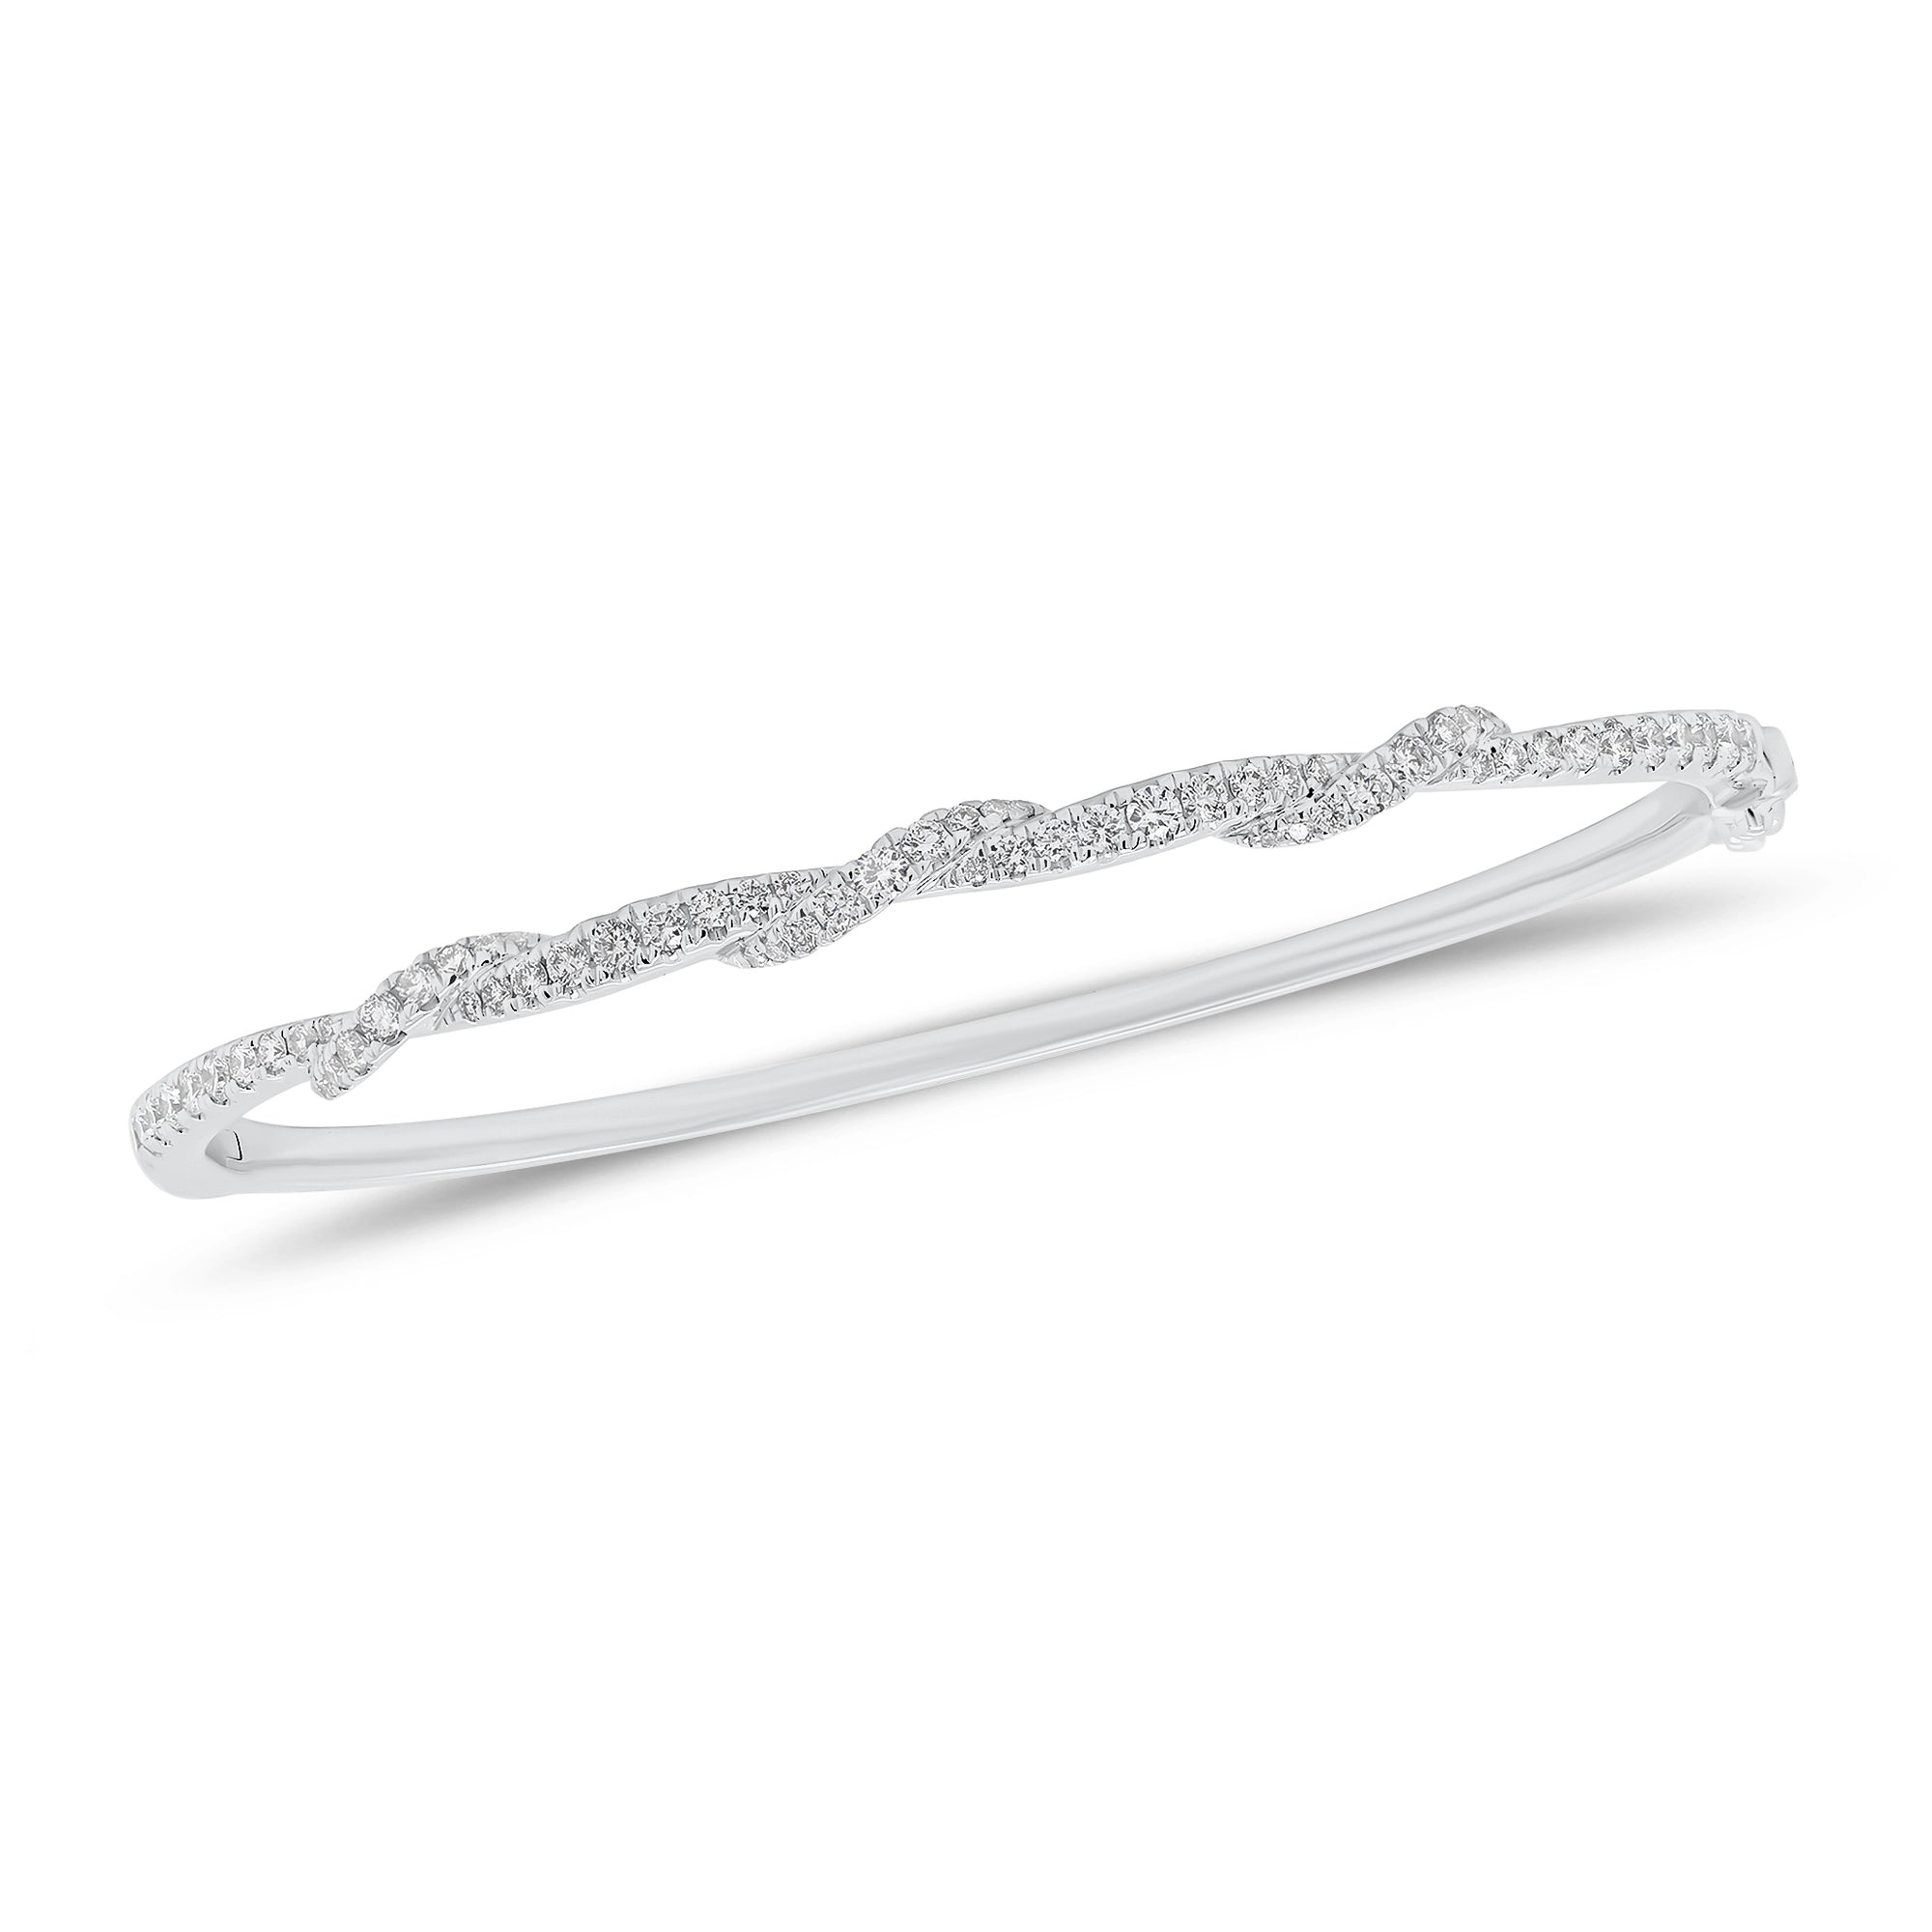 Solid 18k white gold weighing 9.14 grams with 65 round diamonds weighing 0.67 carats Diamond Twist Bangle | Nuha Jewelers